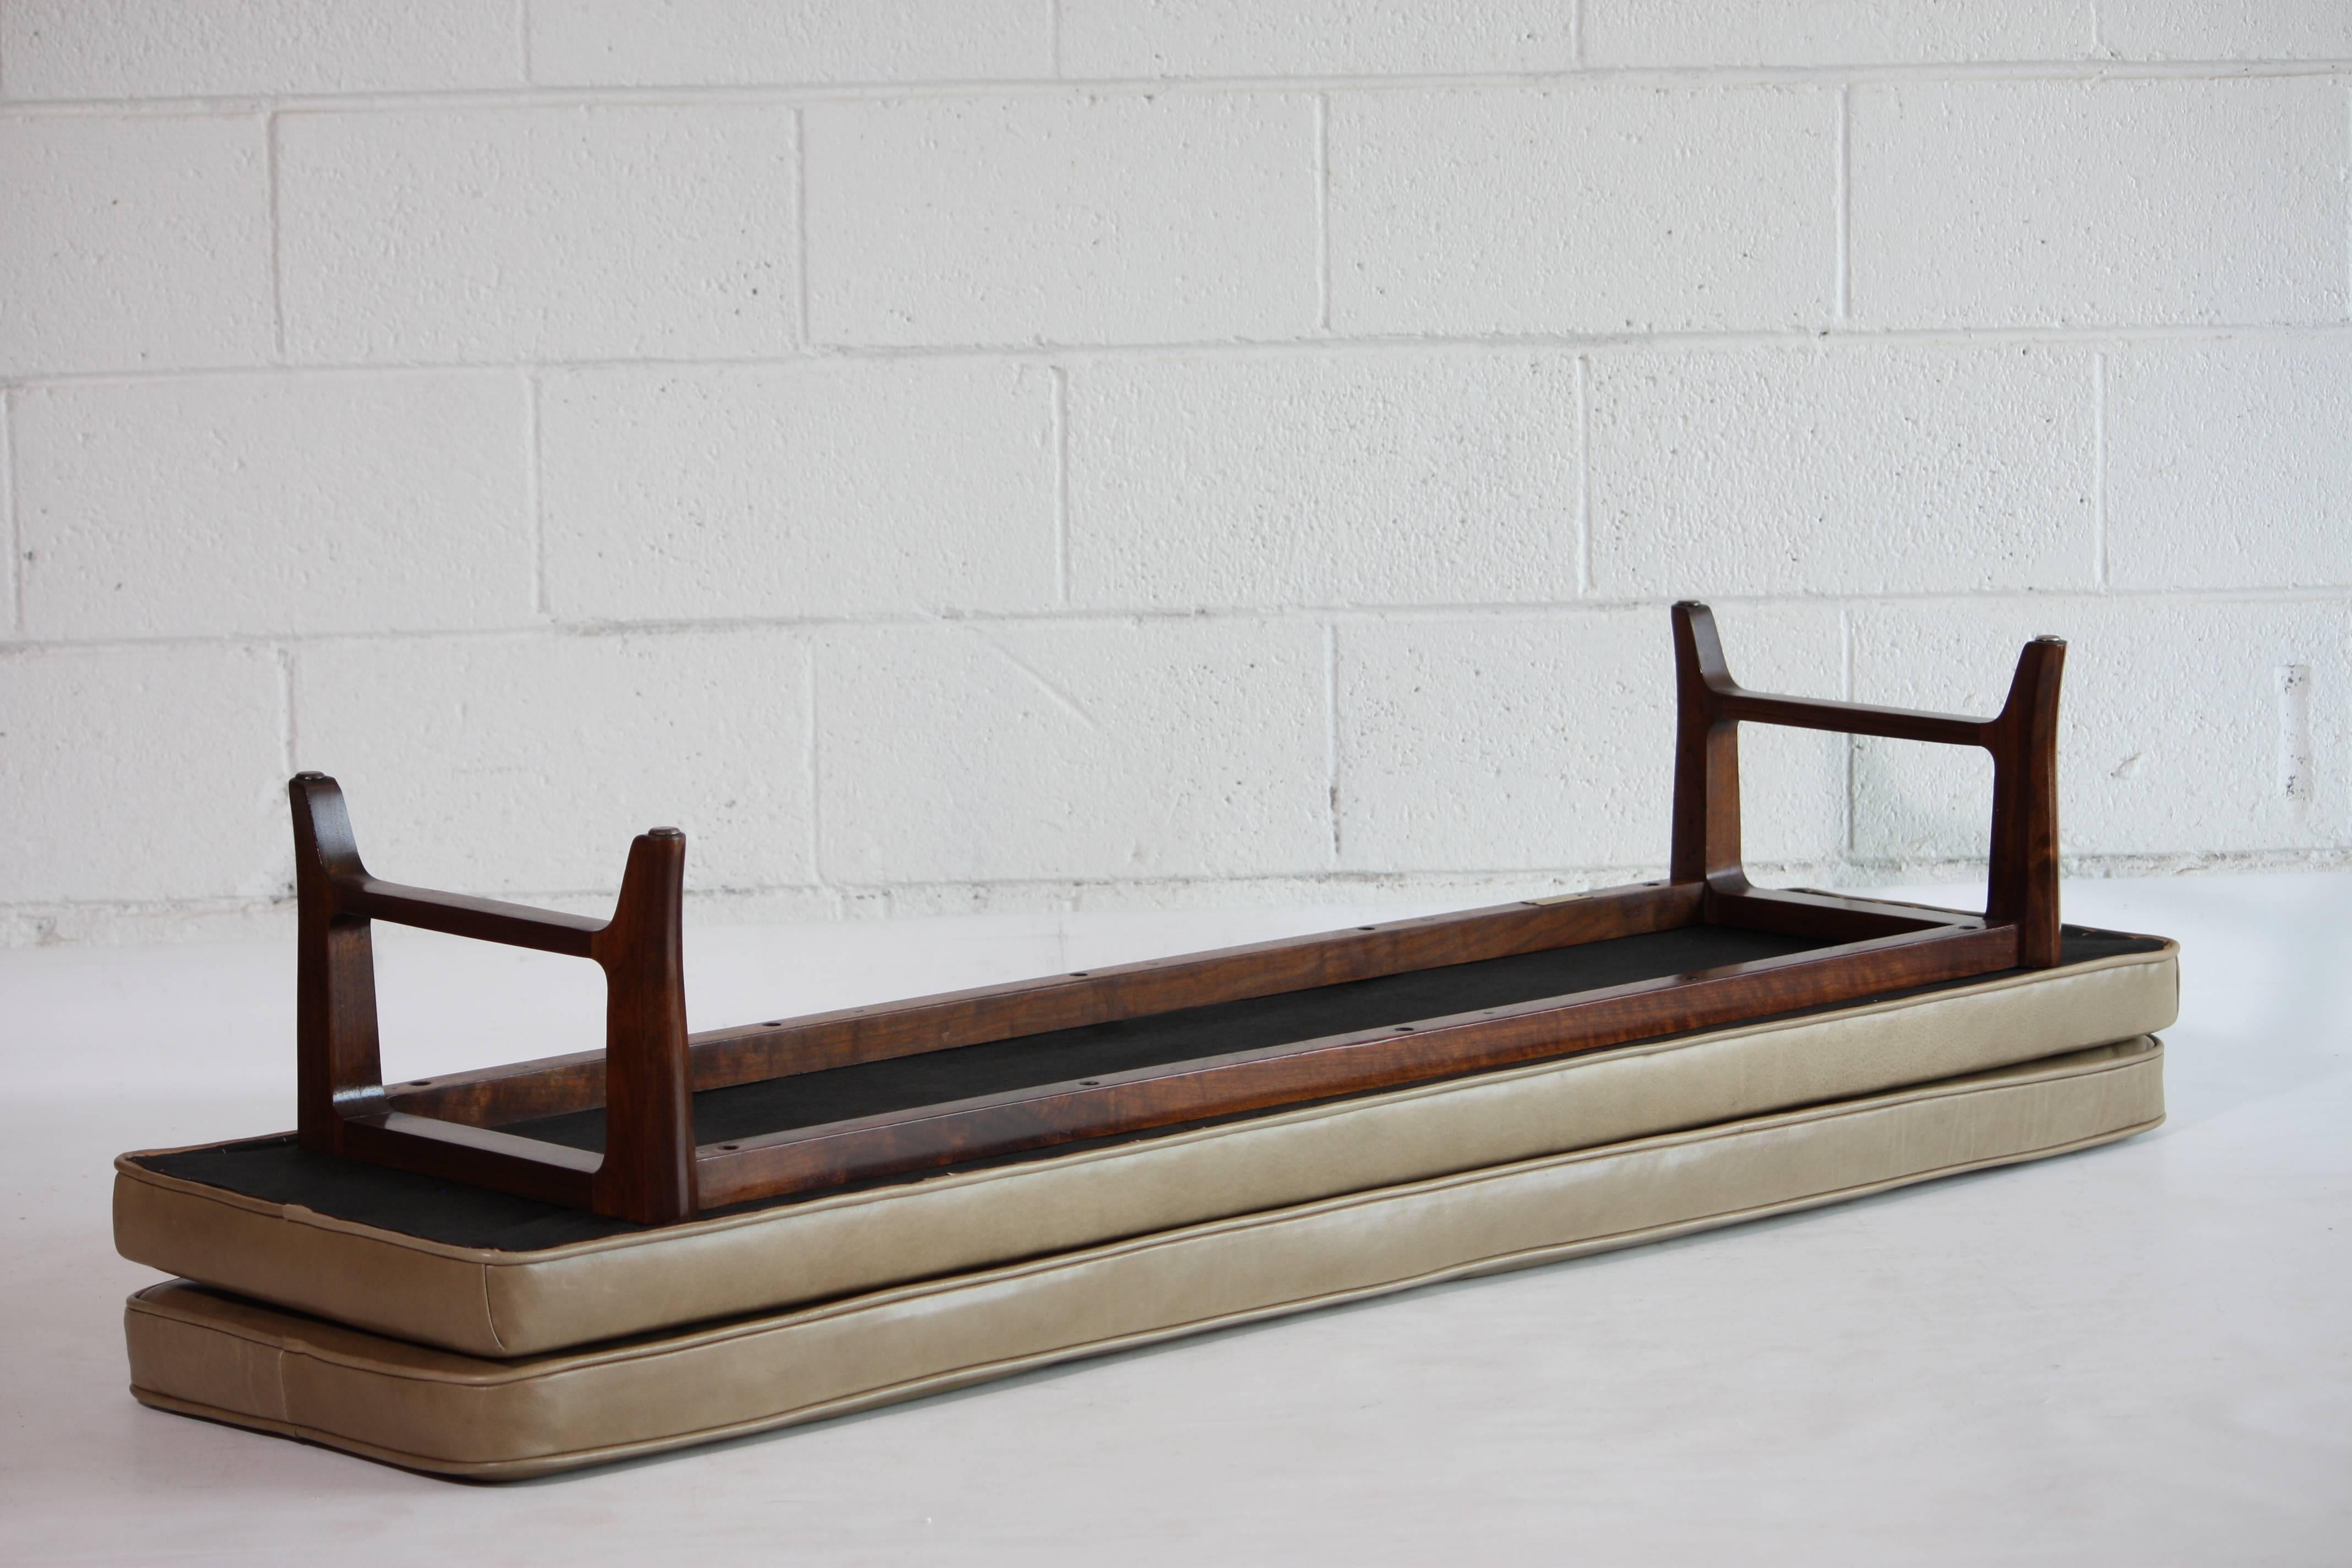 Leather Bench by Edward Wormley for Dunbar